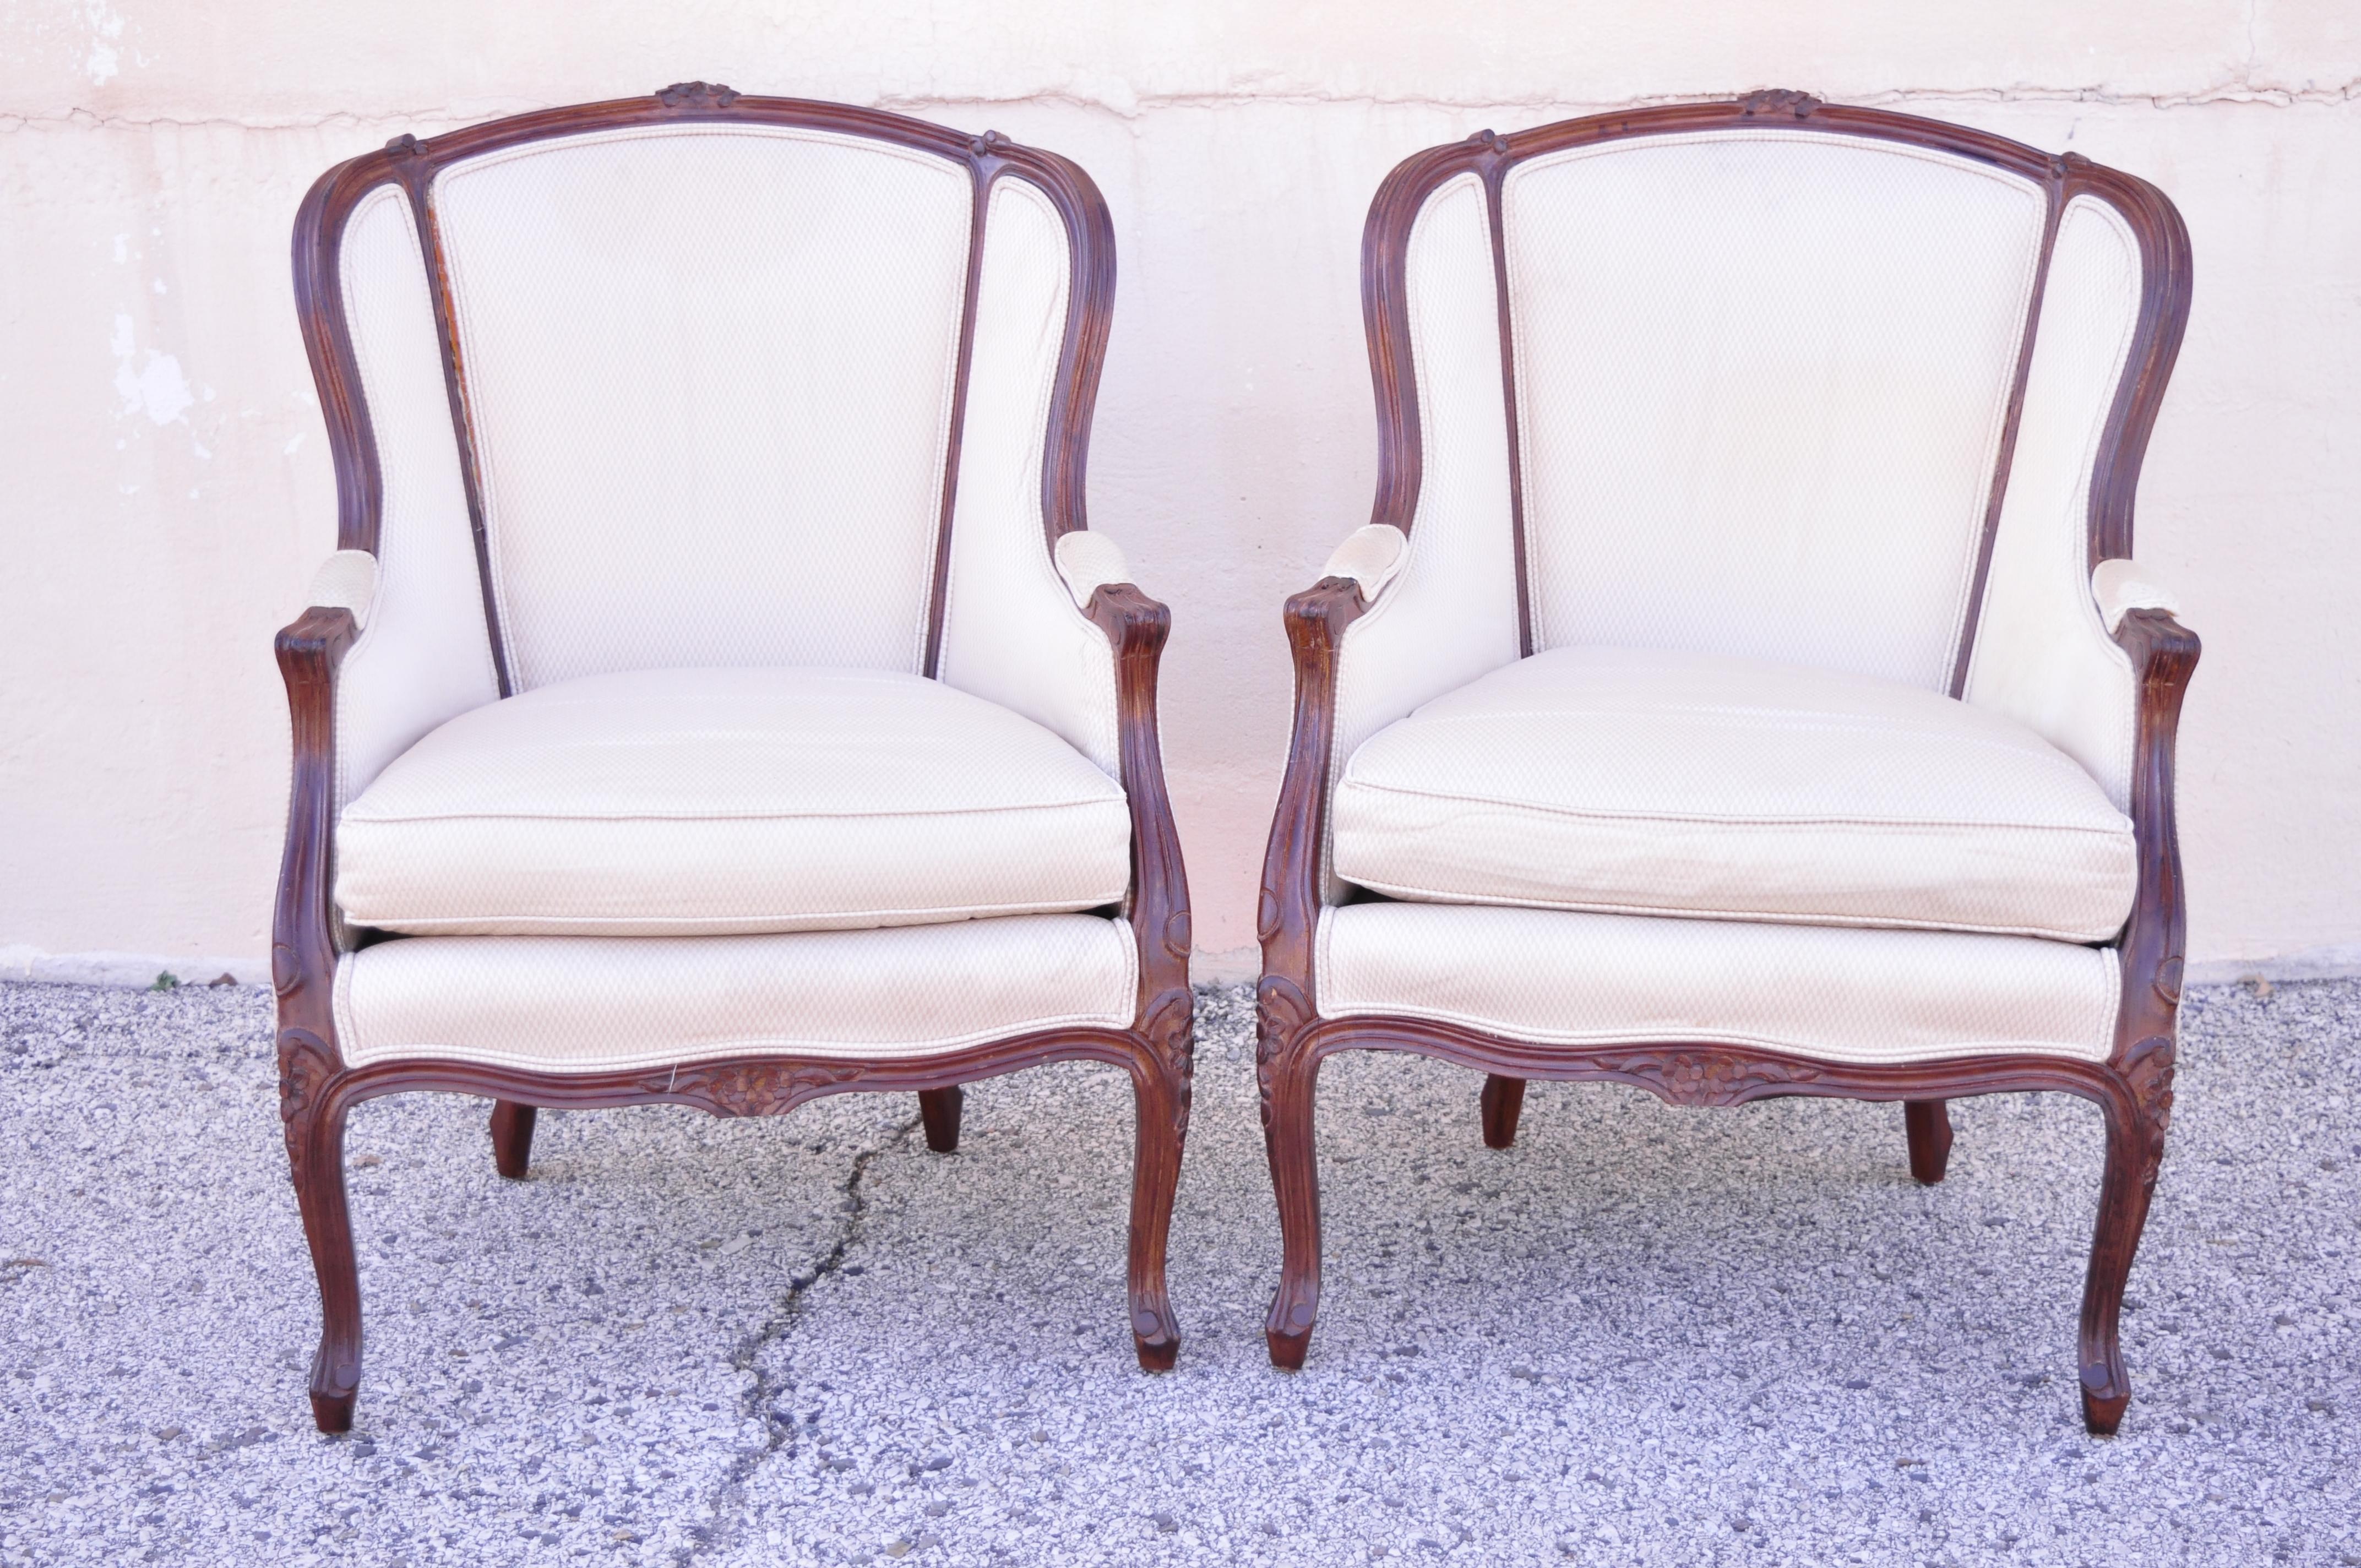 French Provincial Louis XV Style Bergere lounge club arm chairs by Jeffco - a Pair. Item features solid wood construction, upholstered armrests, nicely carved details, original label, cabriole legs, quality American craftsmanship, great style and